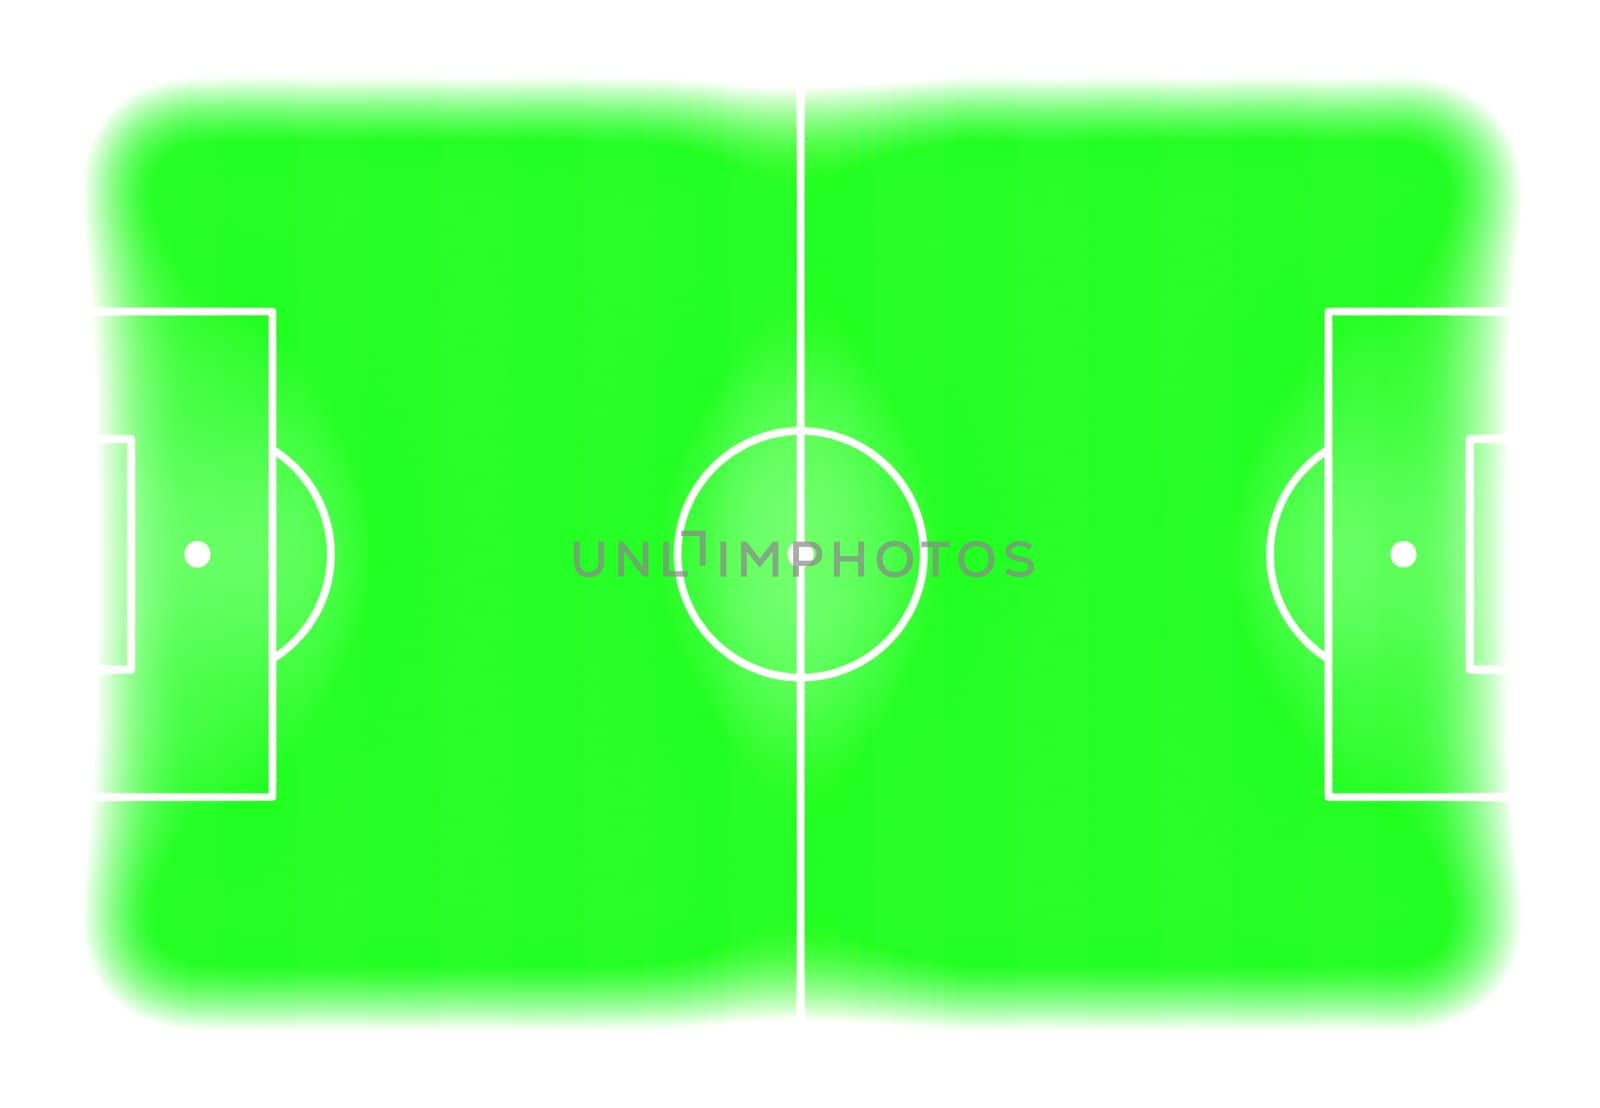 Illustration of a Soccer pitch from above